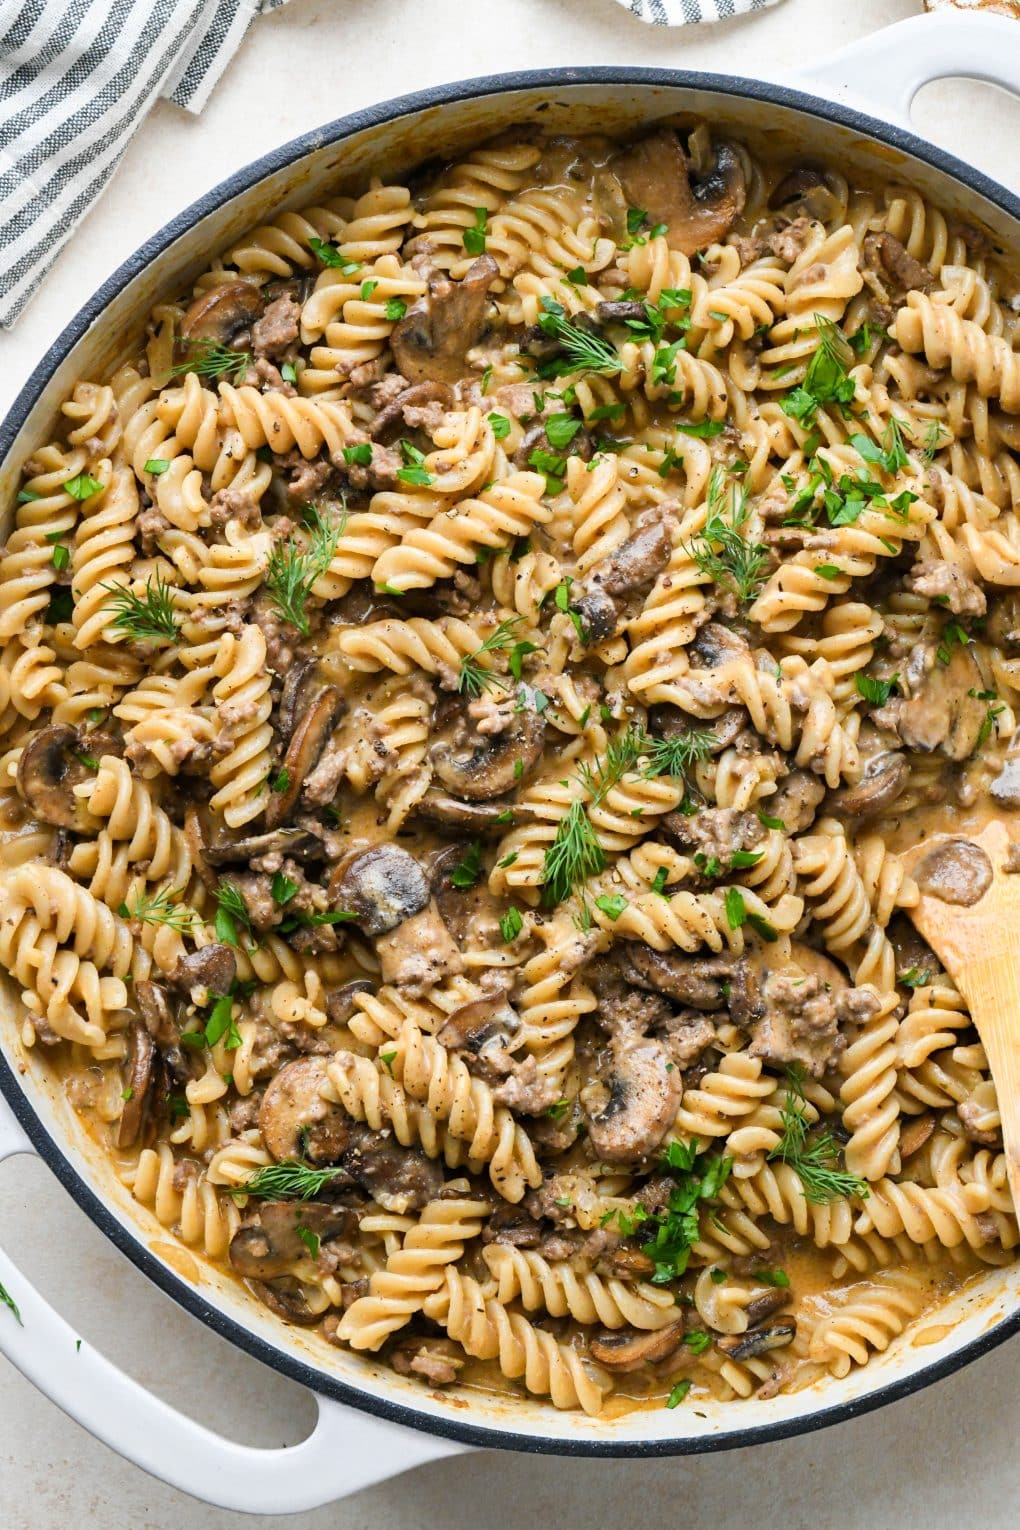 Dairy free beef stroganoff with gluten free fusili noodles and mushrooms in a large, white, enameled cast iron skillet, garnished with fresh dill and fresh parsley, on a creamy off white background.